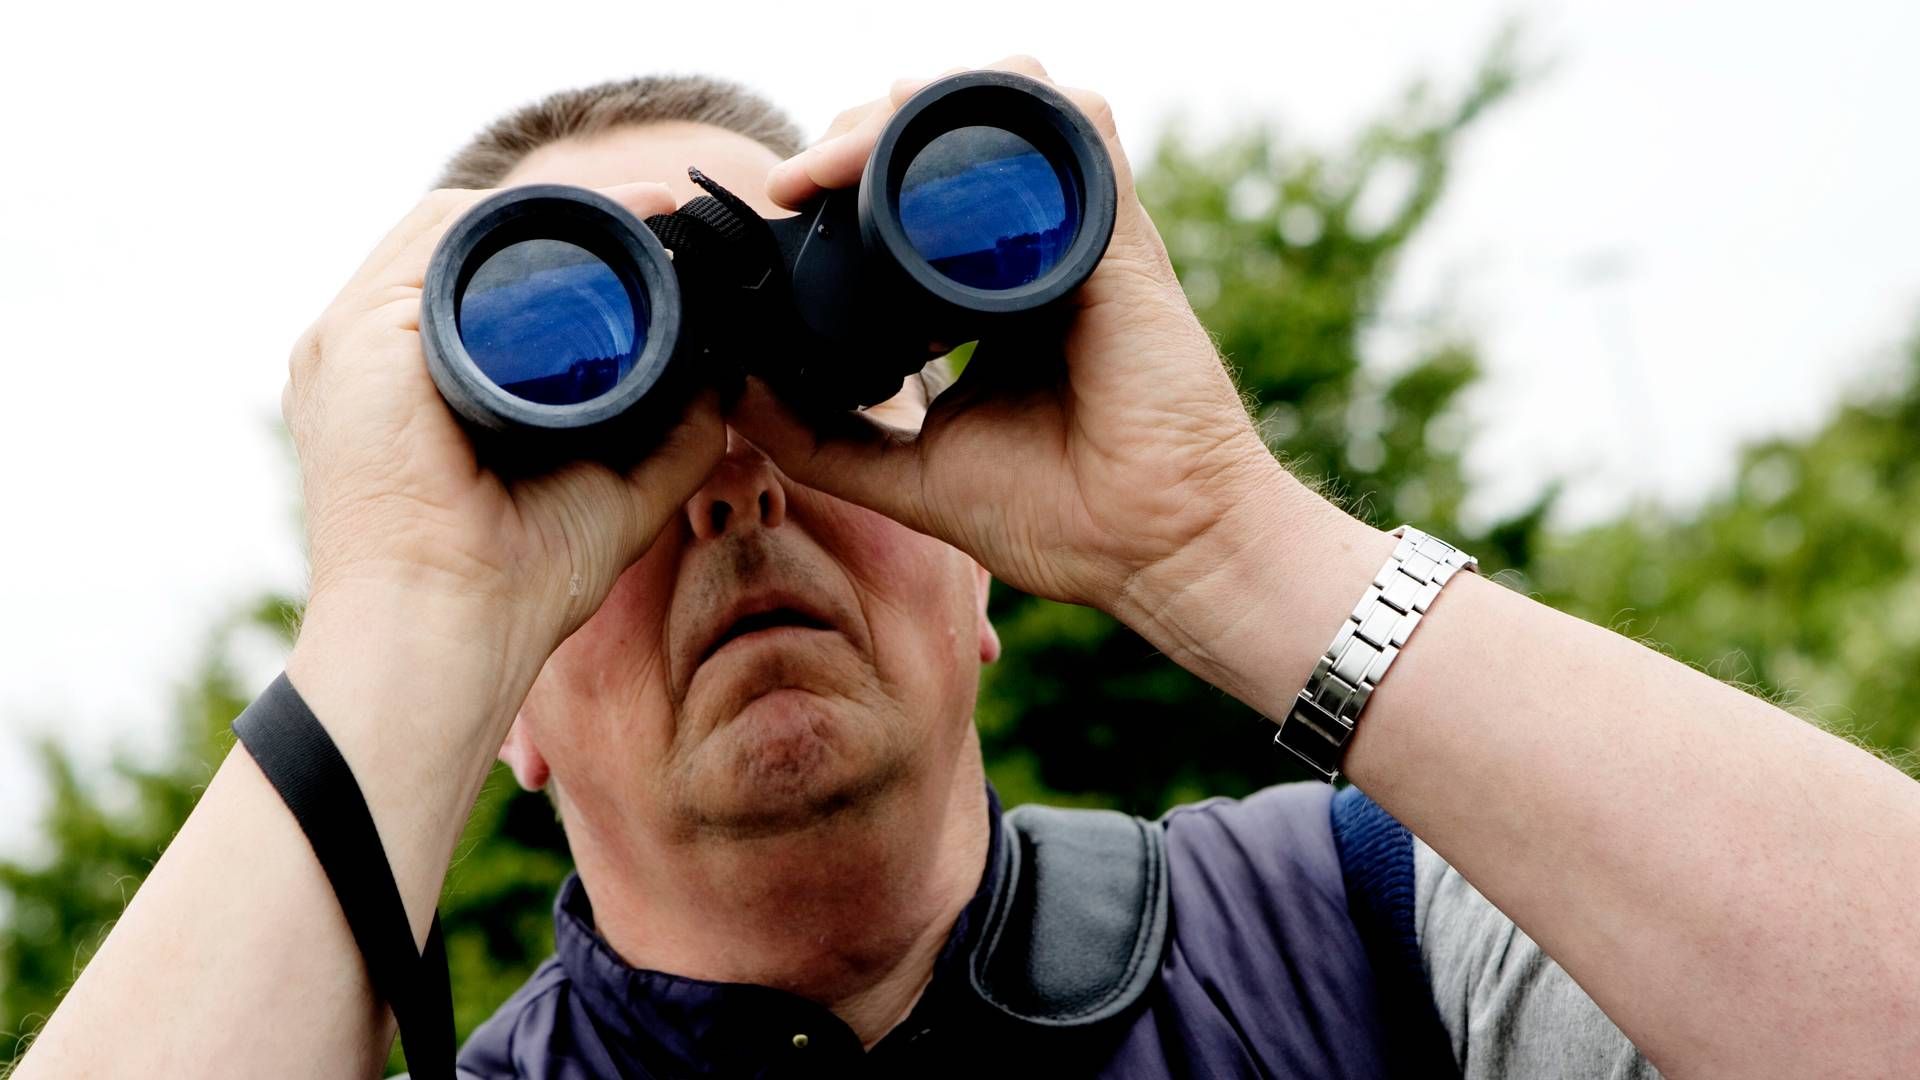 A Nordic investor is on the lookout for one or more equity managers. | Photo: Thomas Borberg/Politiken/Ritzau Scanpix